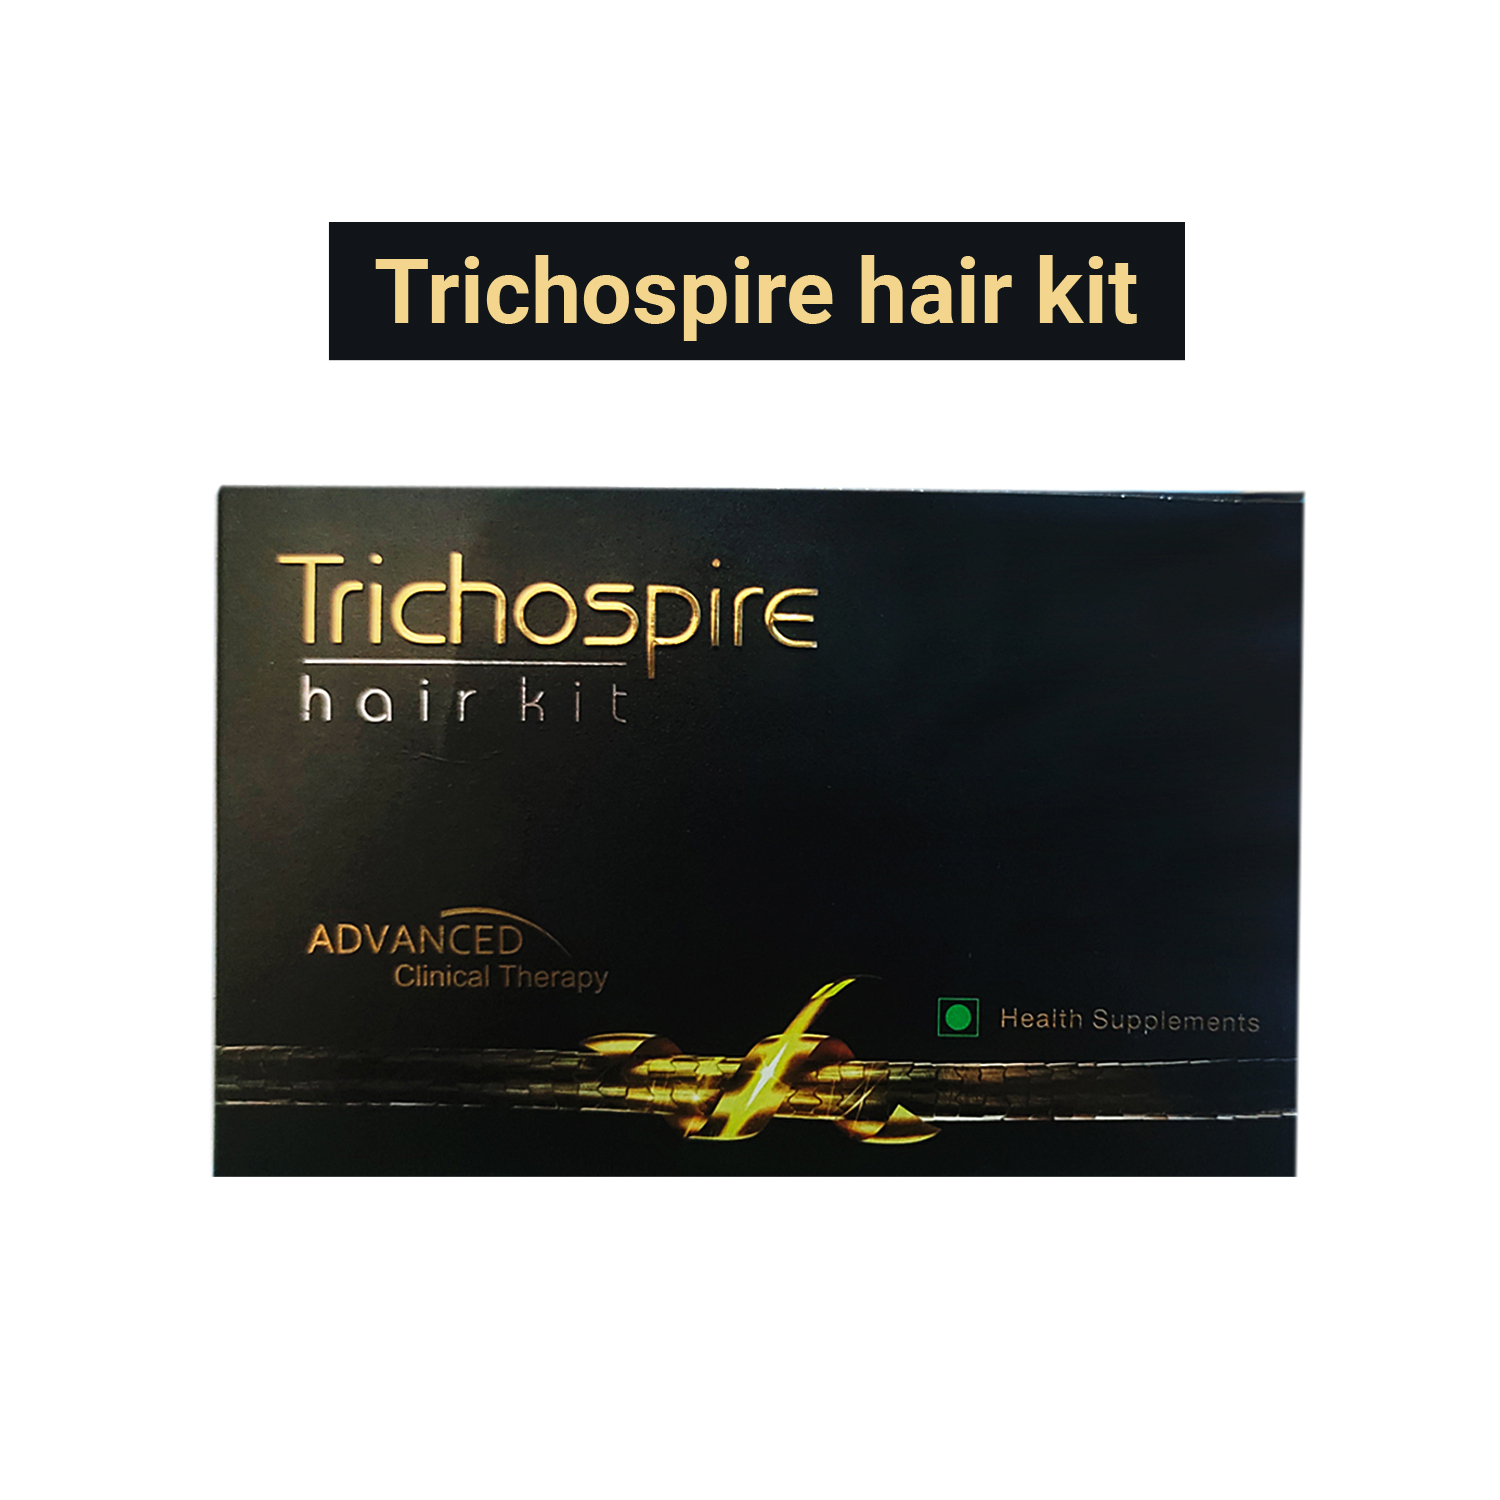 Trichospire hair kit ₹959 | Dosage, composition, Results, side effects -  Cureka